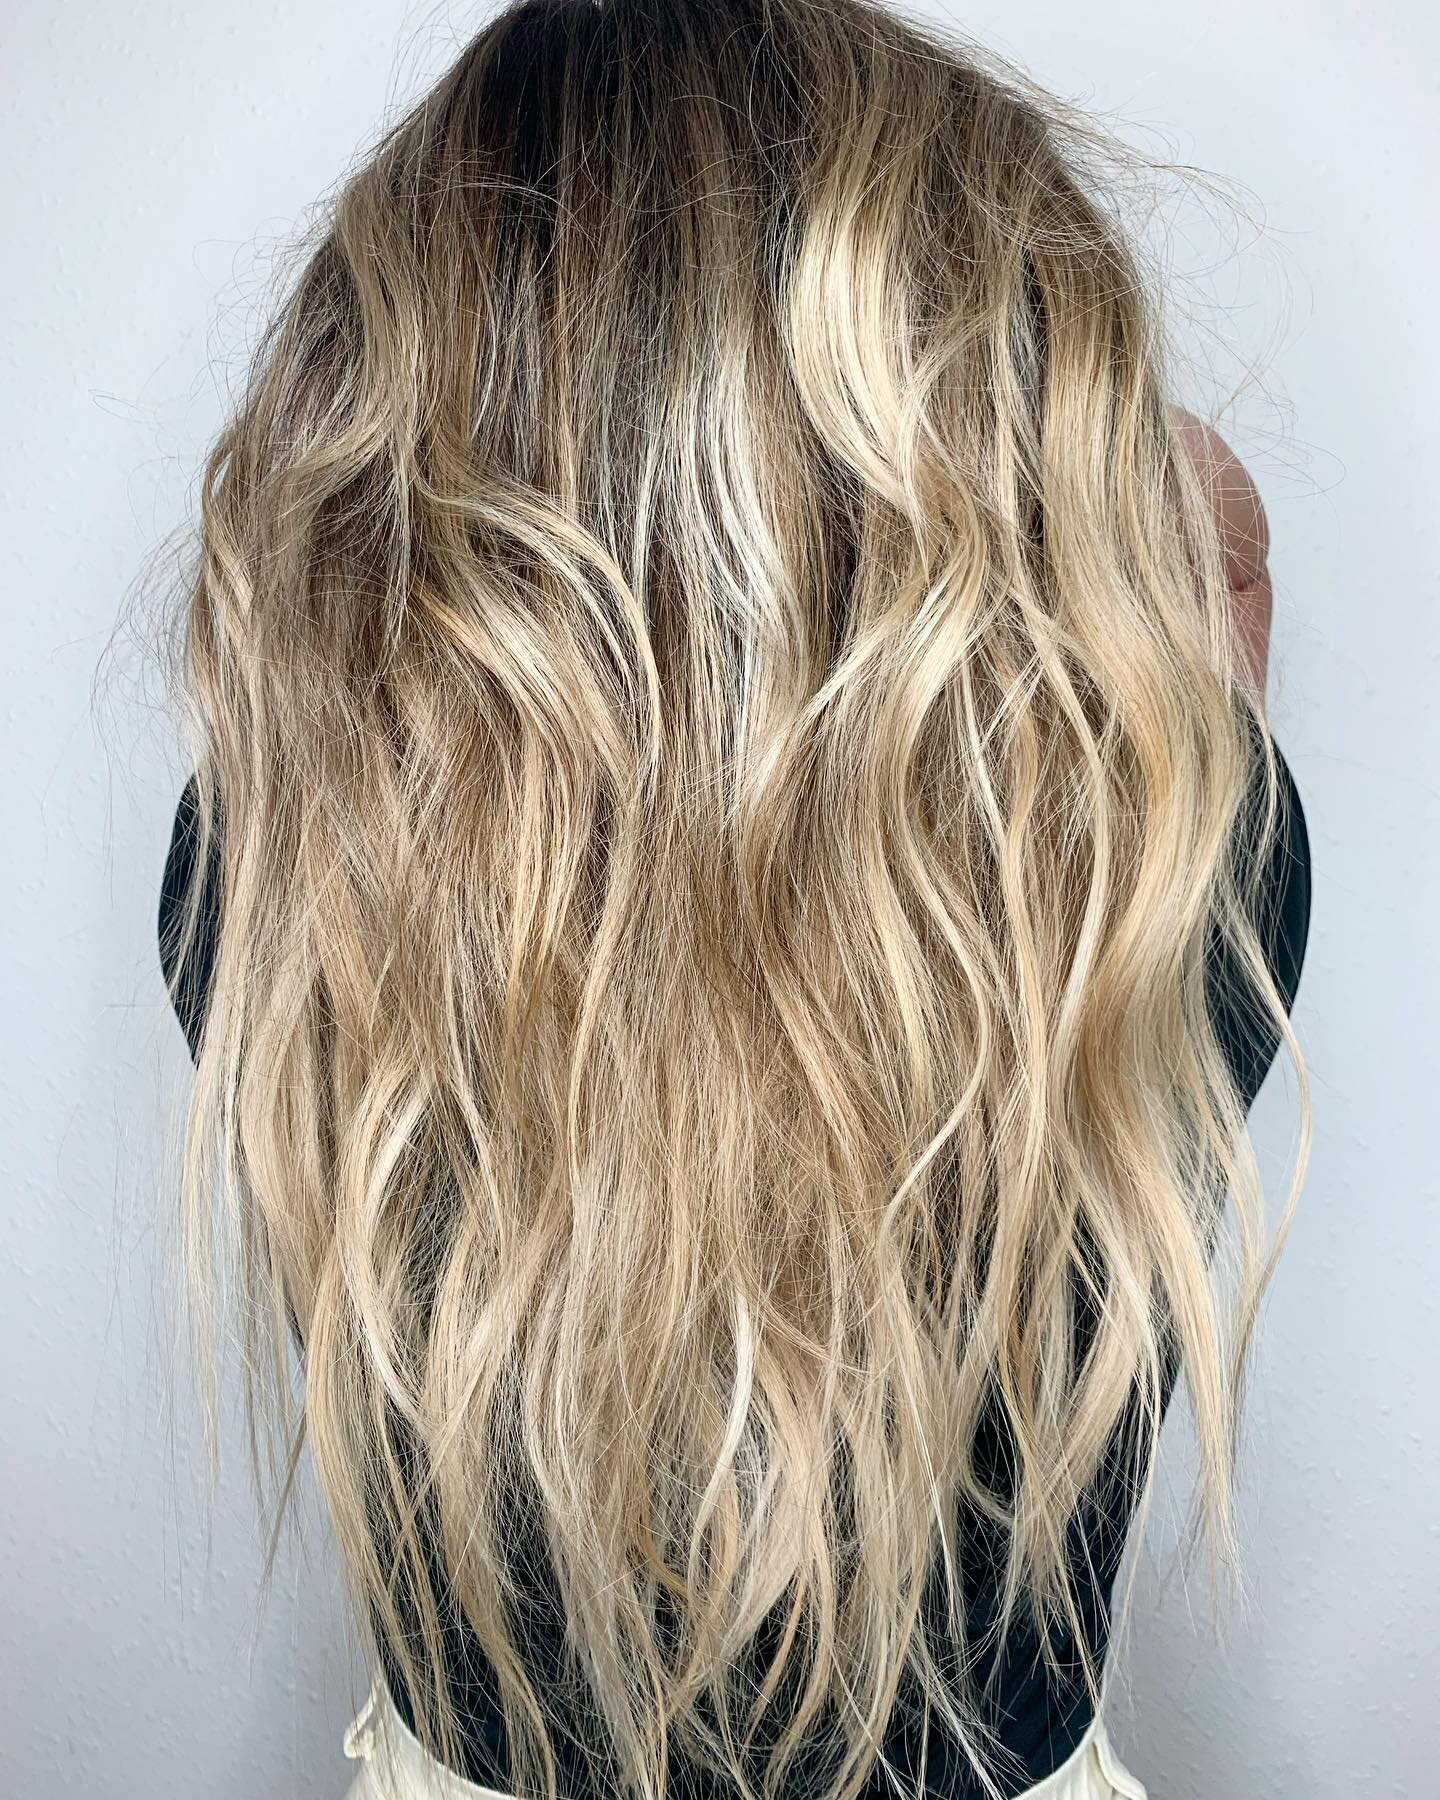 Depth &amp; Pops but make it sparkly and golden ✨ 

Around 200 strands of custom cut @greatlengthsusa ethically sourced luxury hair. I used 5 different rooted and ombr&eacute; tones. I did very minimal teasy lights for color, and opted to add in all 